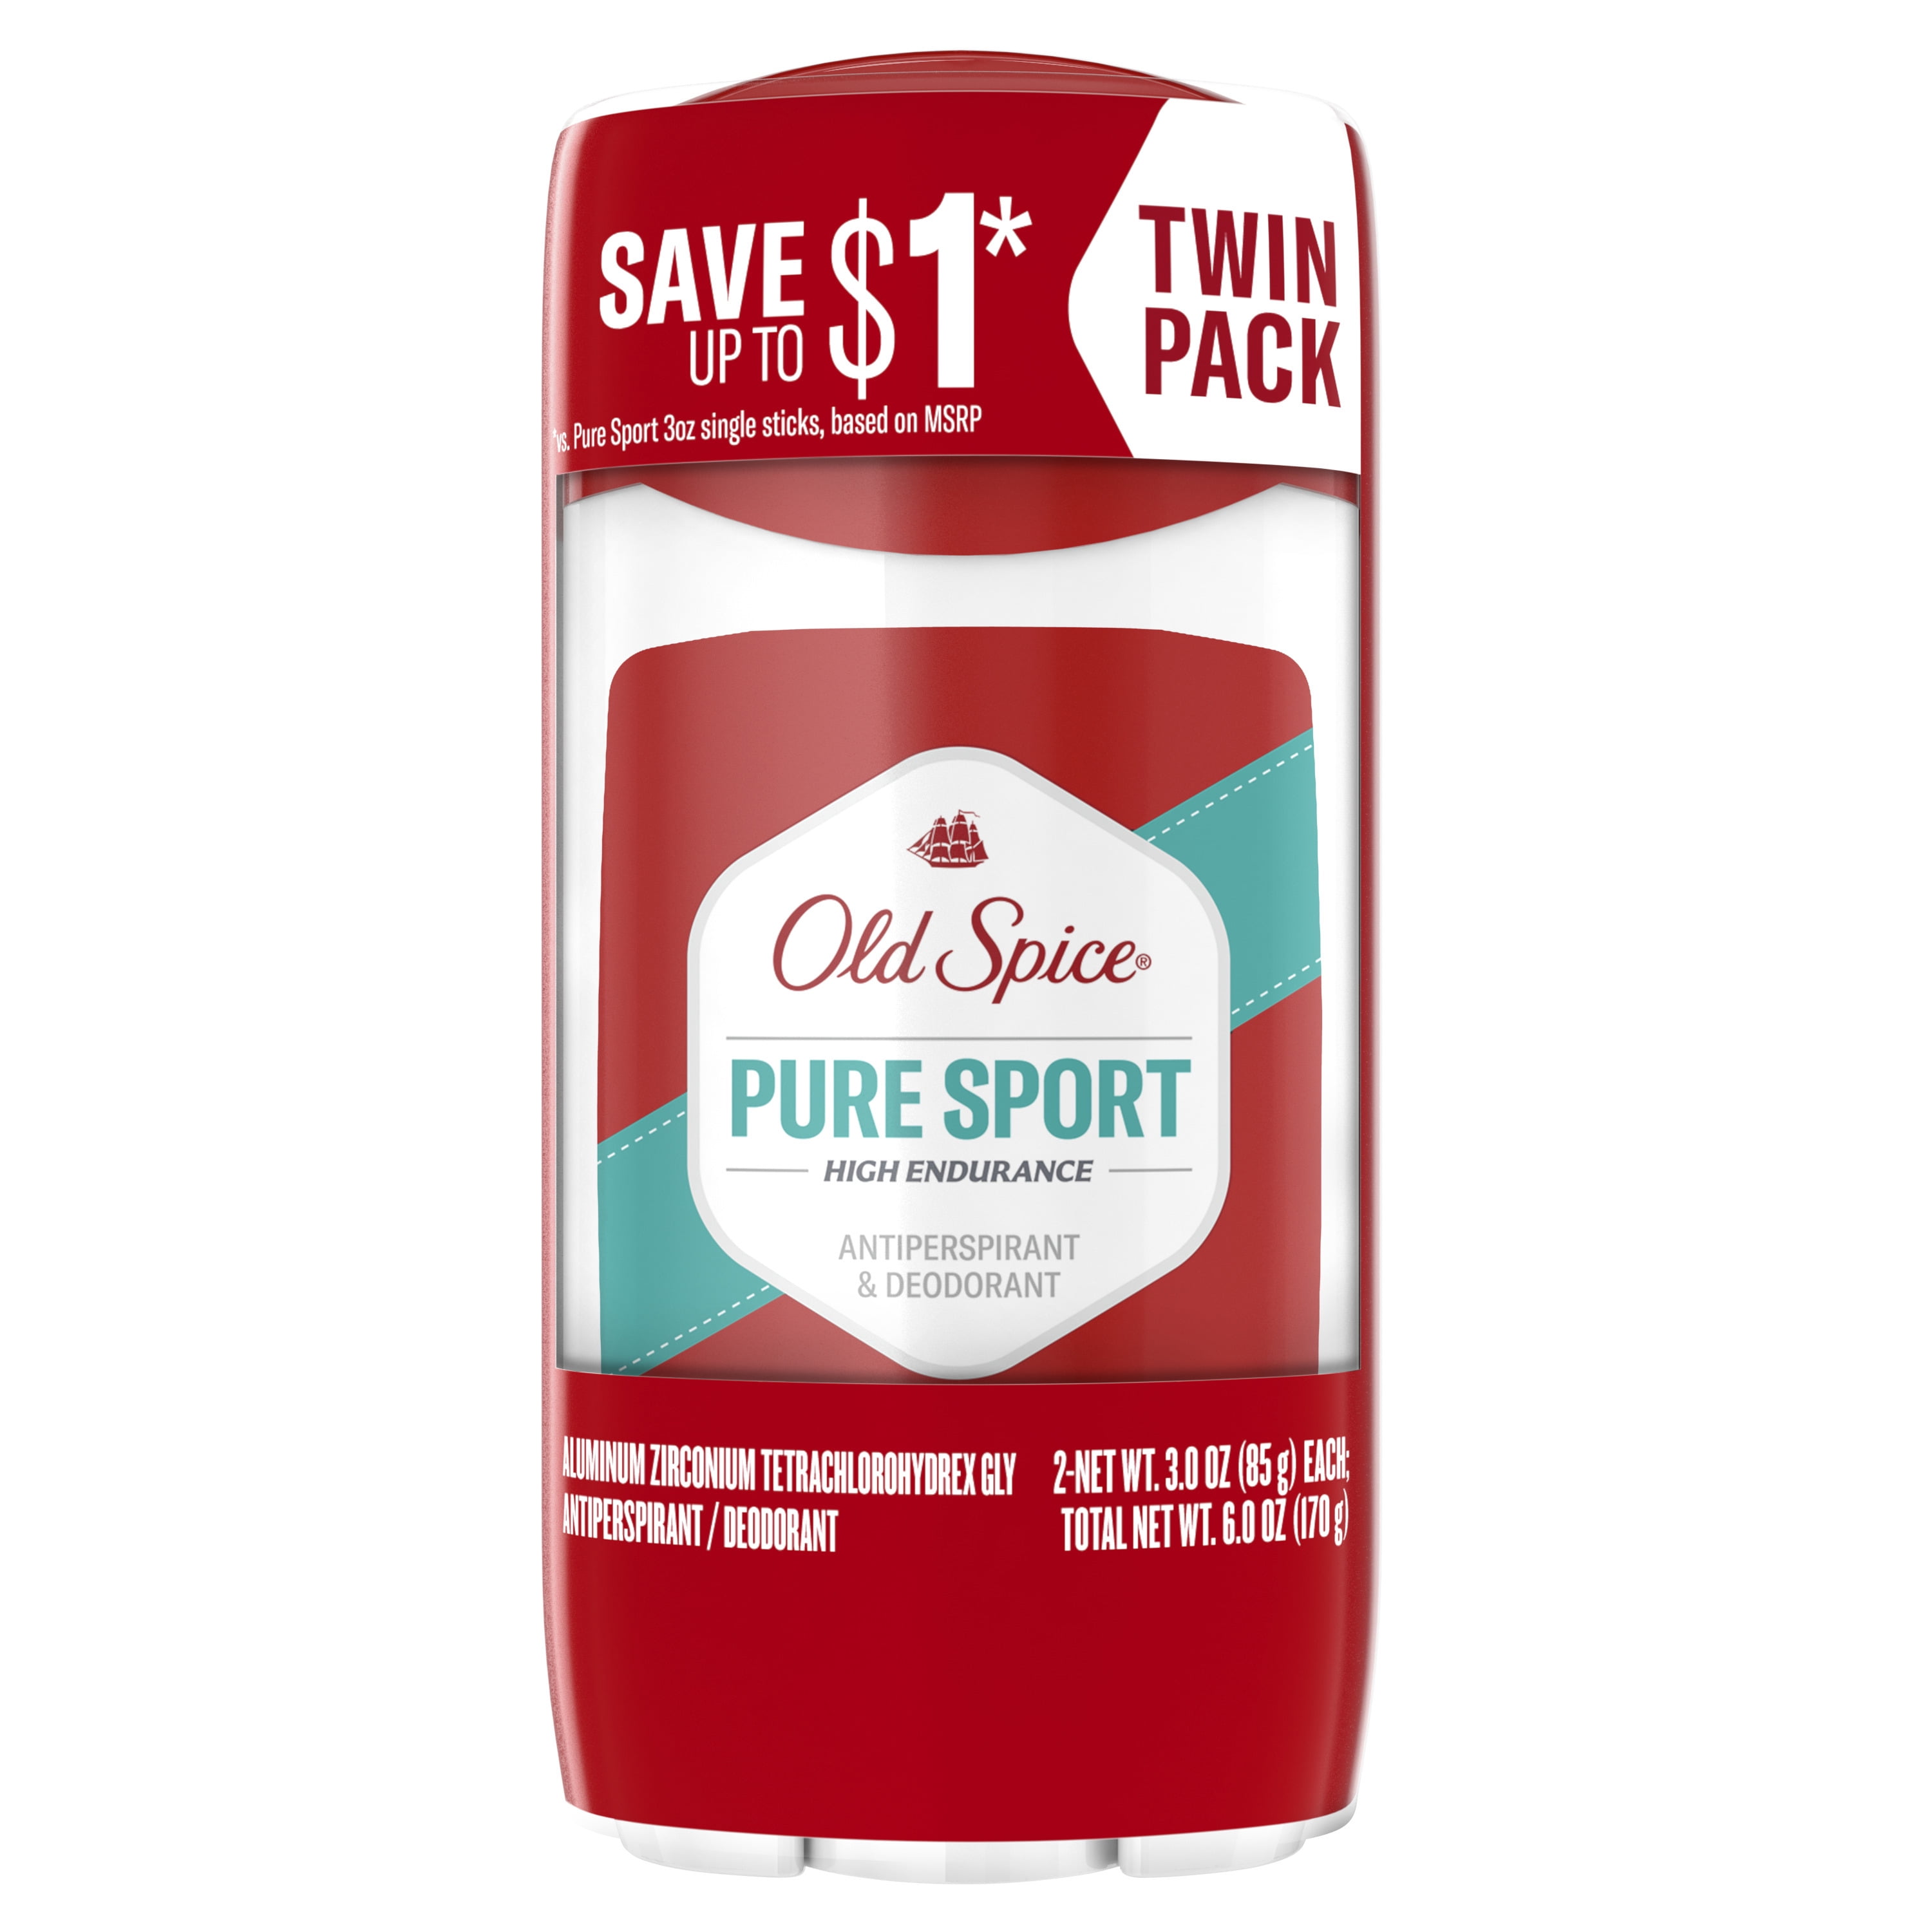 Old Spice High Endurance Anti-Perspirant Deodorant for Men, Pure Sport Scent, Twin Pack, 3.0 oz each